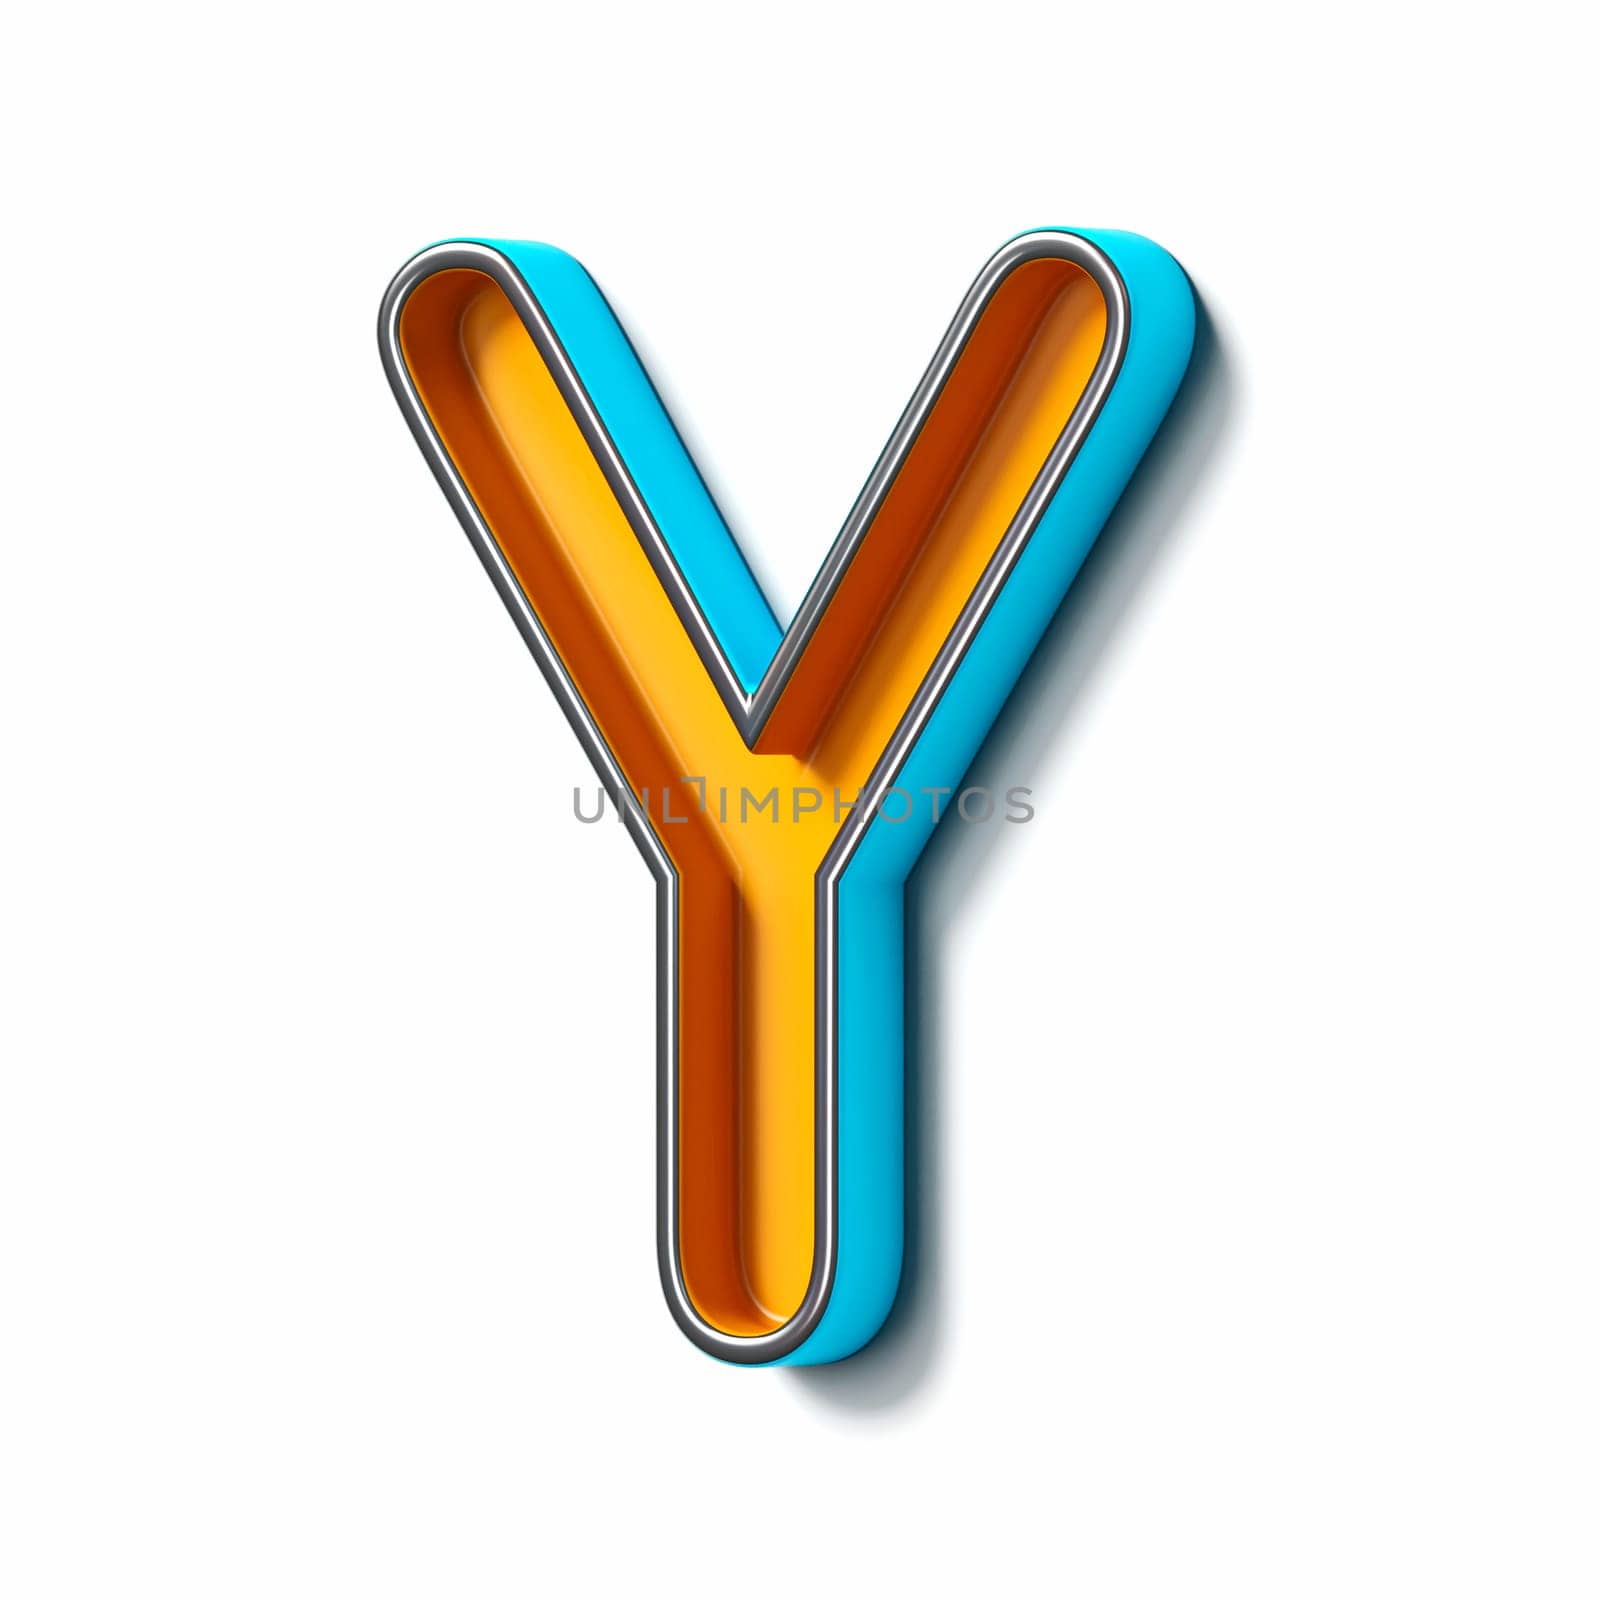 Orange blue thin metal font Letter Y 3D rendering illustration isolated on white background